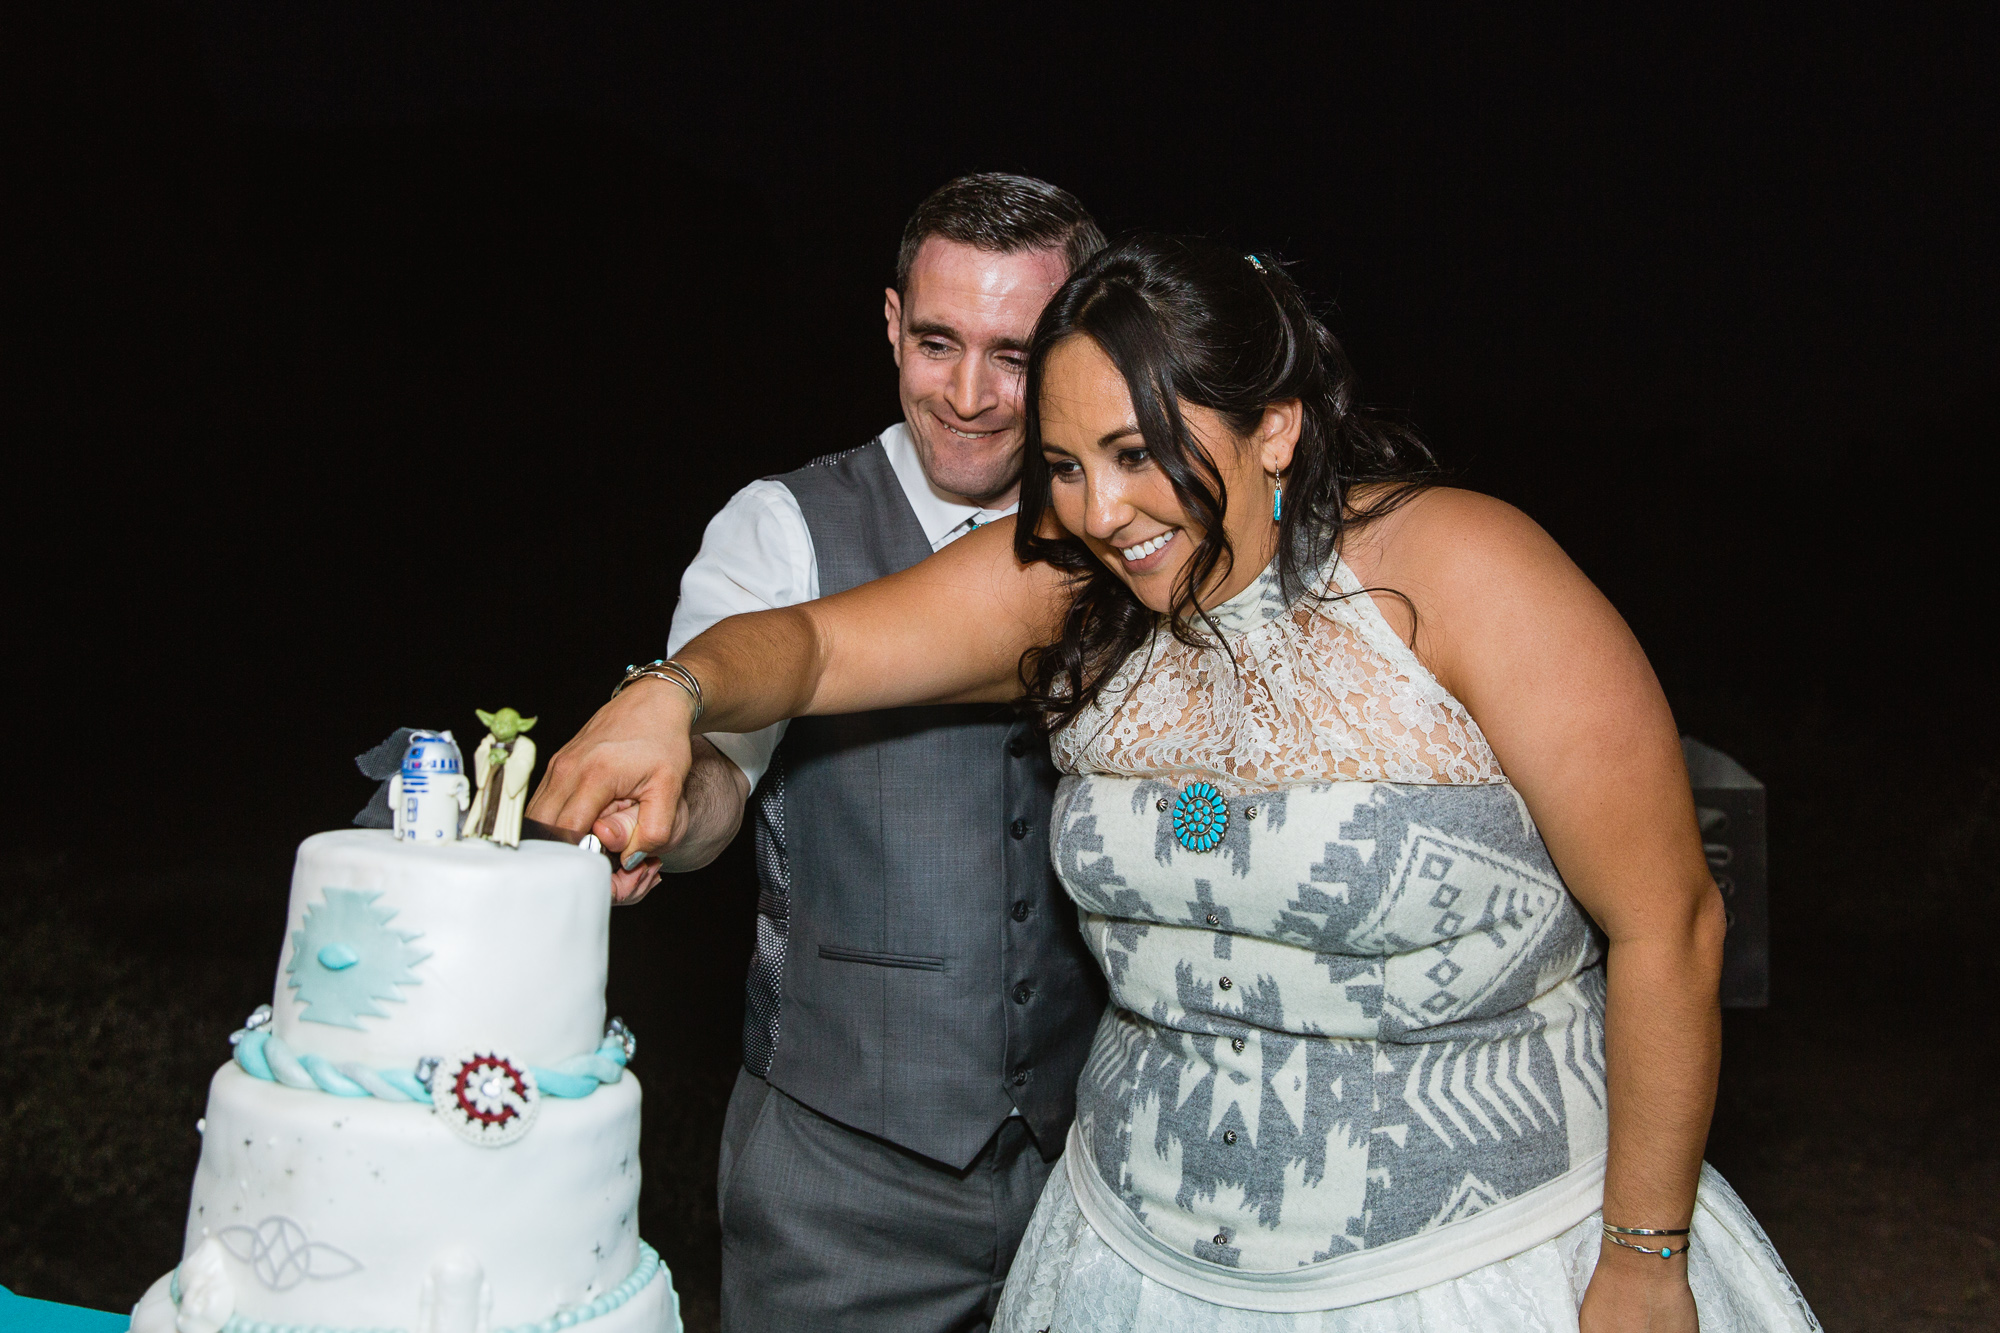 Bride and groom cutting the cake at their wedding reception by PMA Photography.